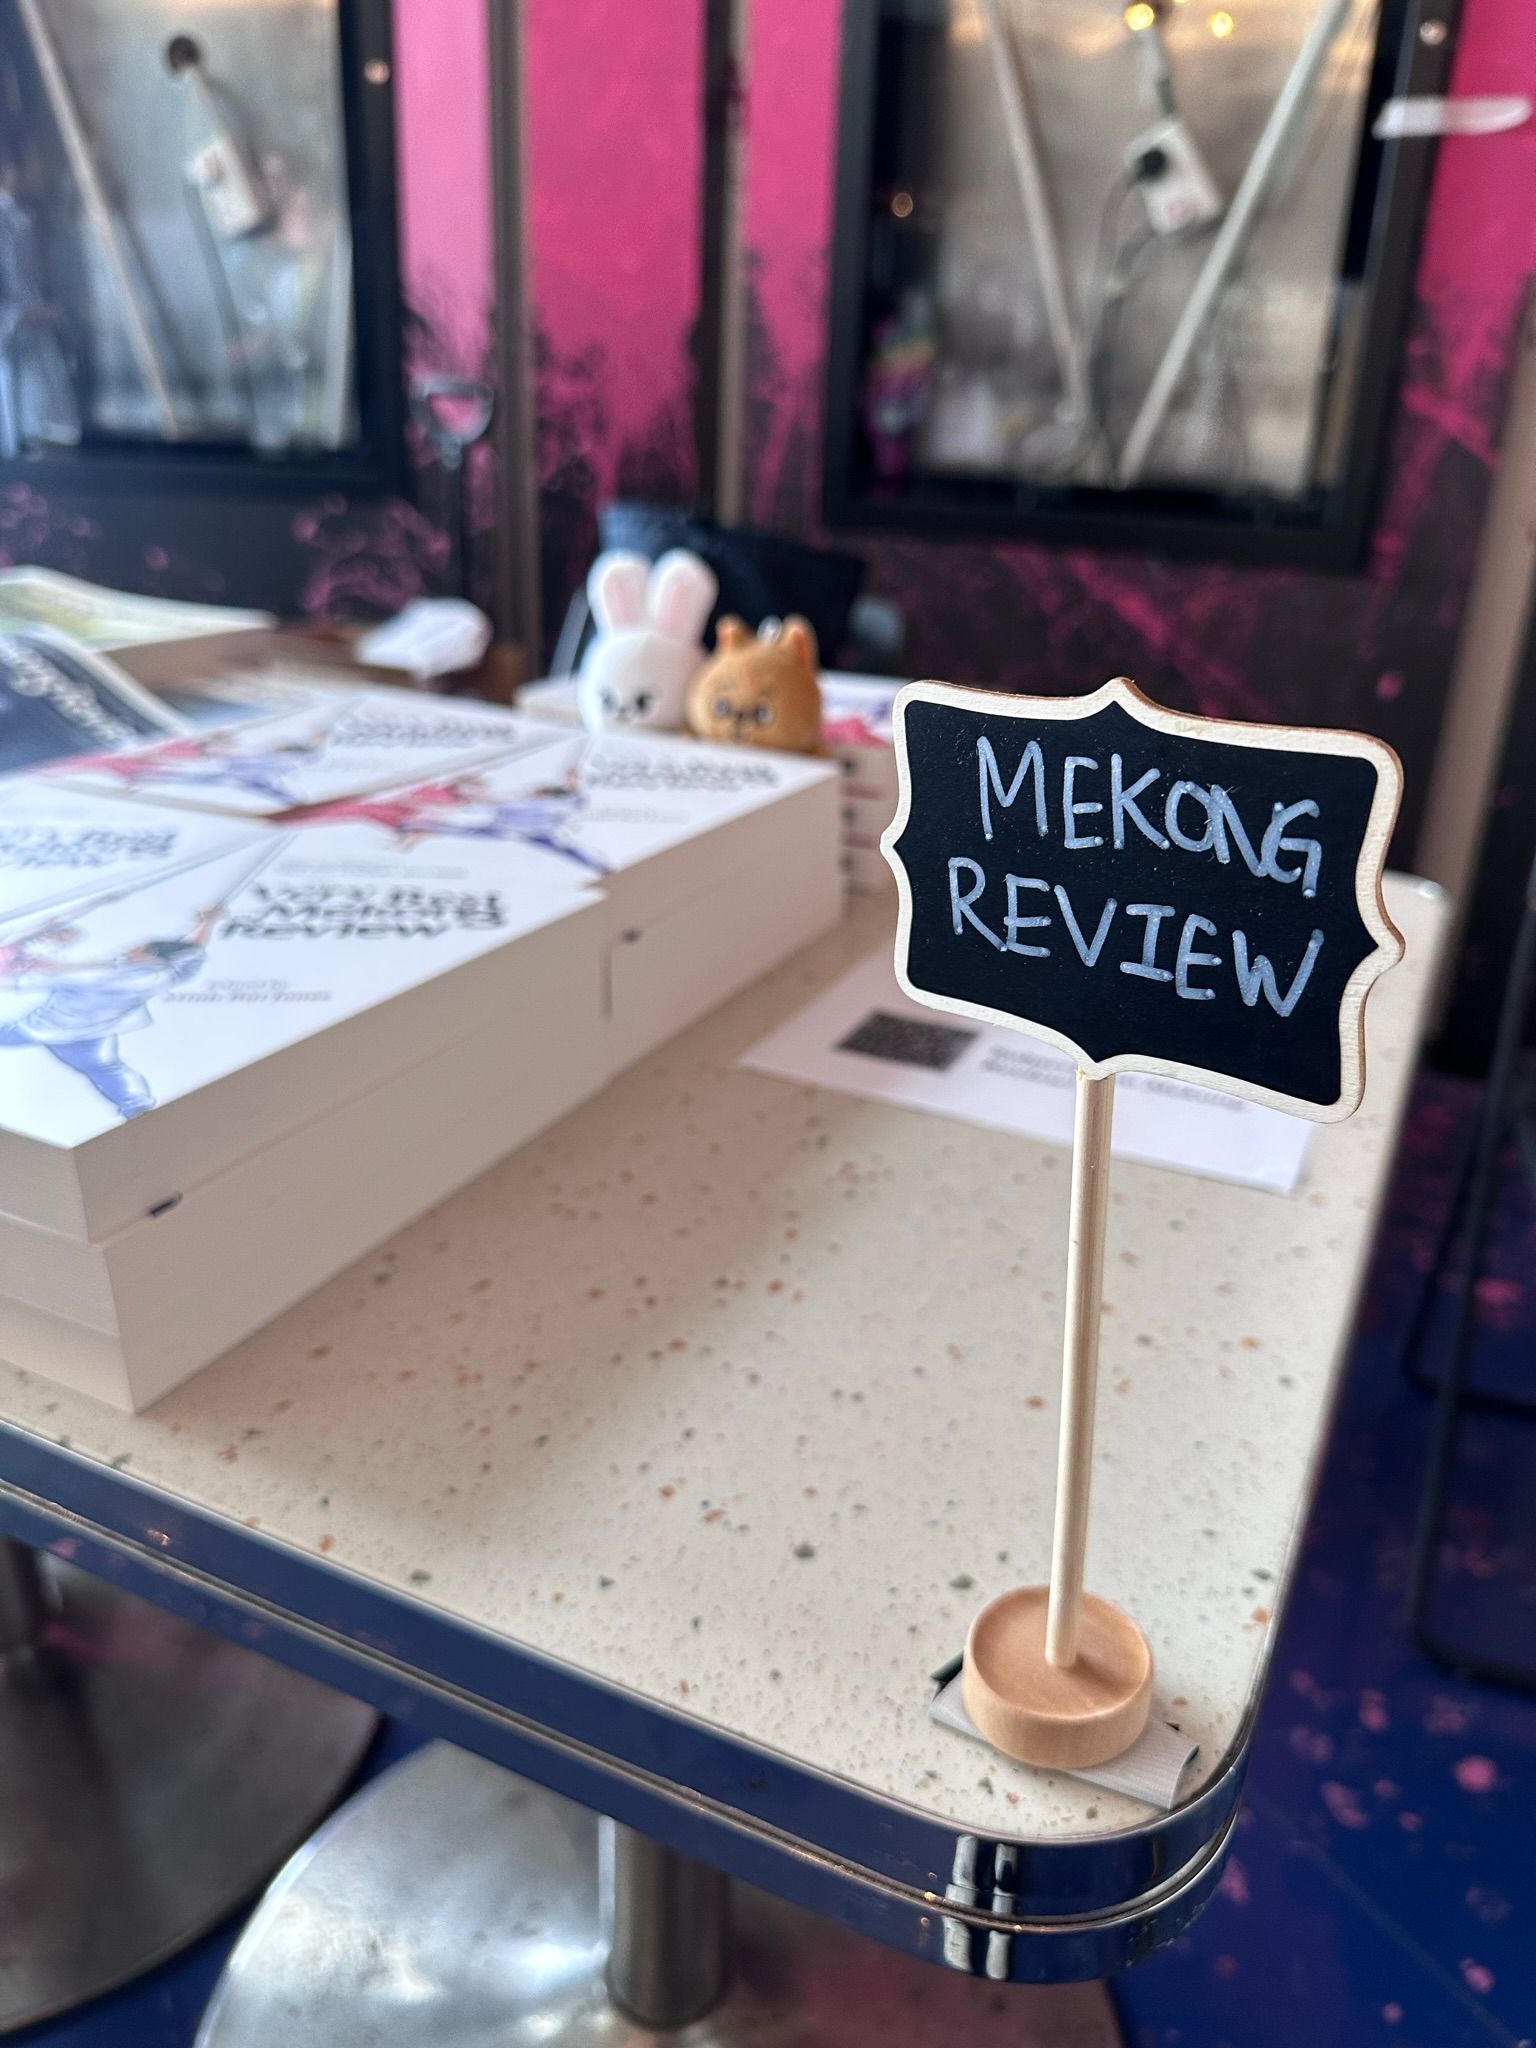 A metal table with books entitled "The Very Best of Mekong Review" arranged on them. In the foreground is a small stand on which "Mekong Review" is written.